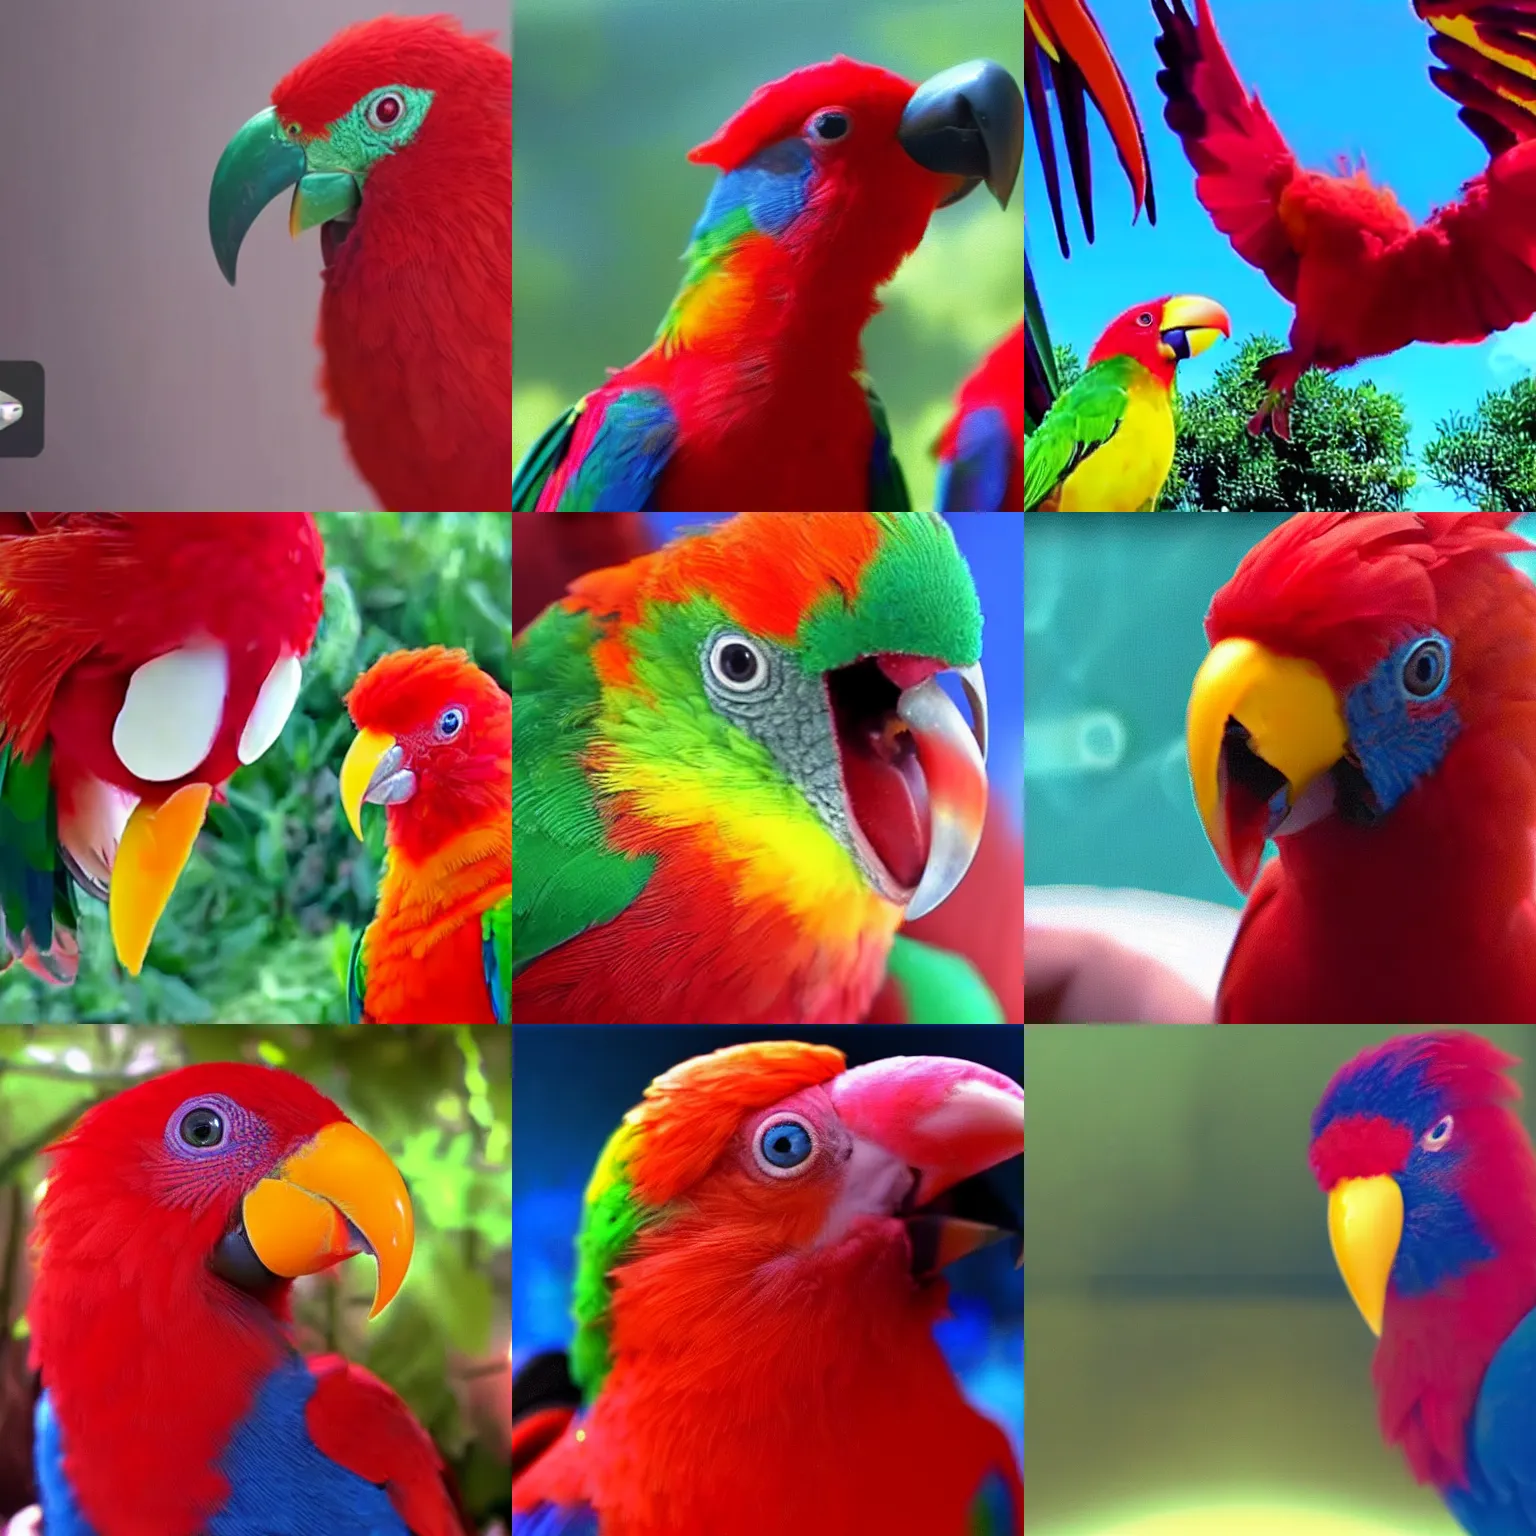 Prompt: red chattering lory bird gumi laughing wue wue wue wuewuewue then judging as seen from beneath mighty presence, viral youtube animal video